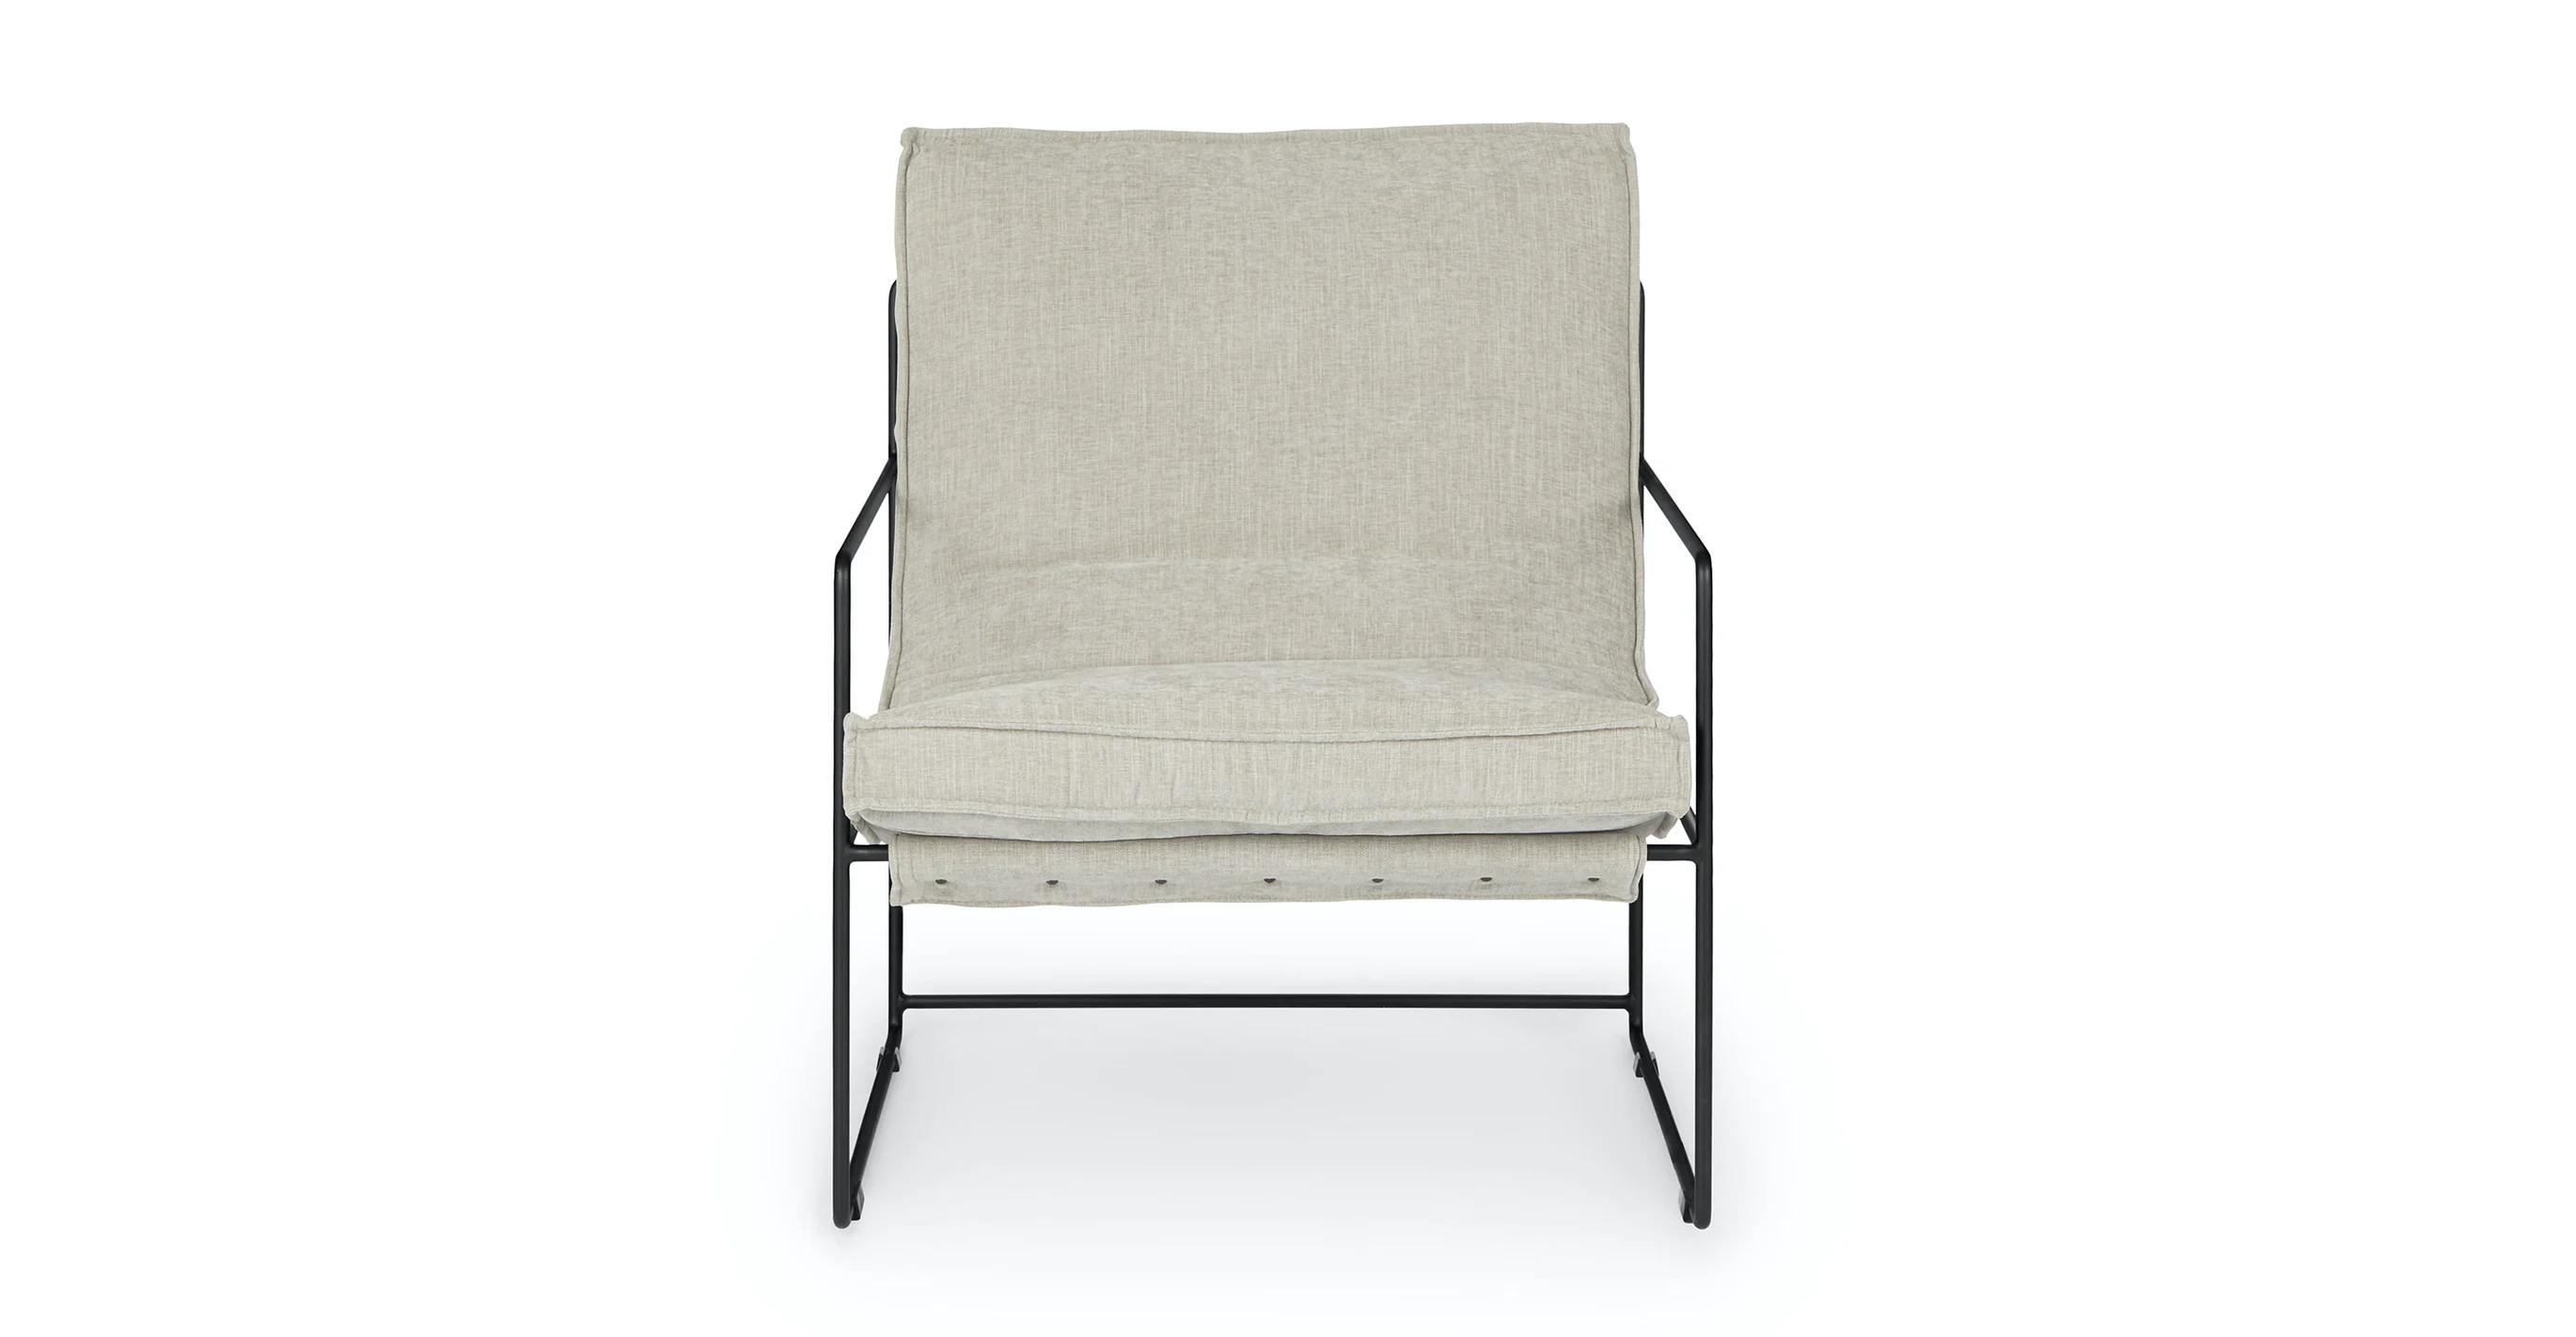 Entin Whistle Gray Lounge Chair - Image 1